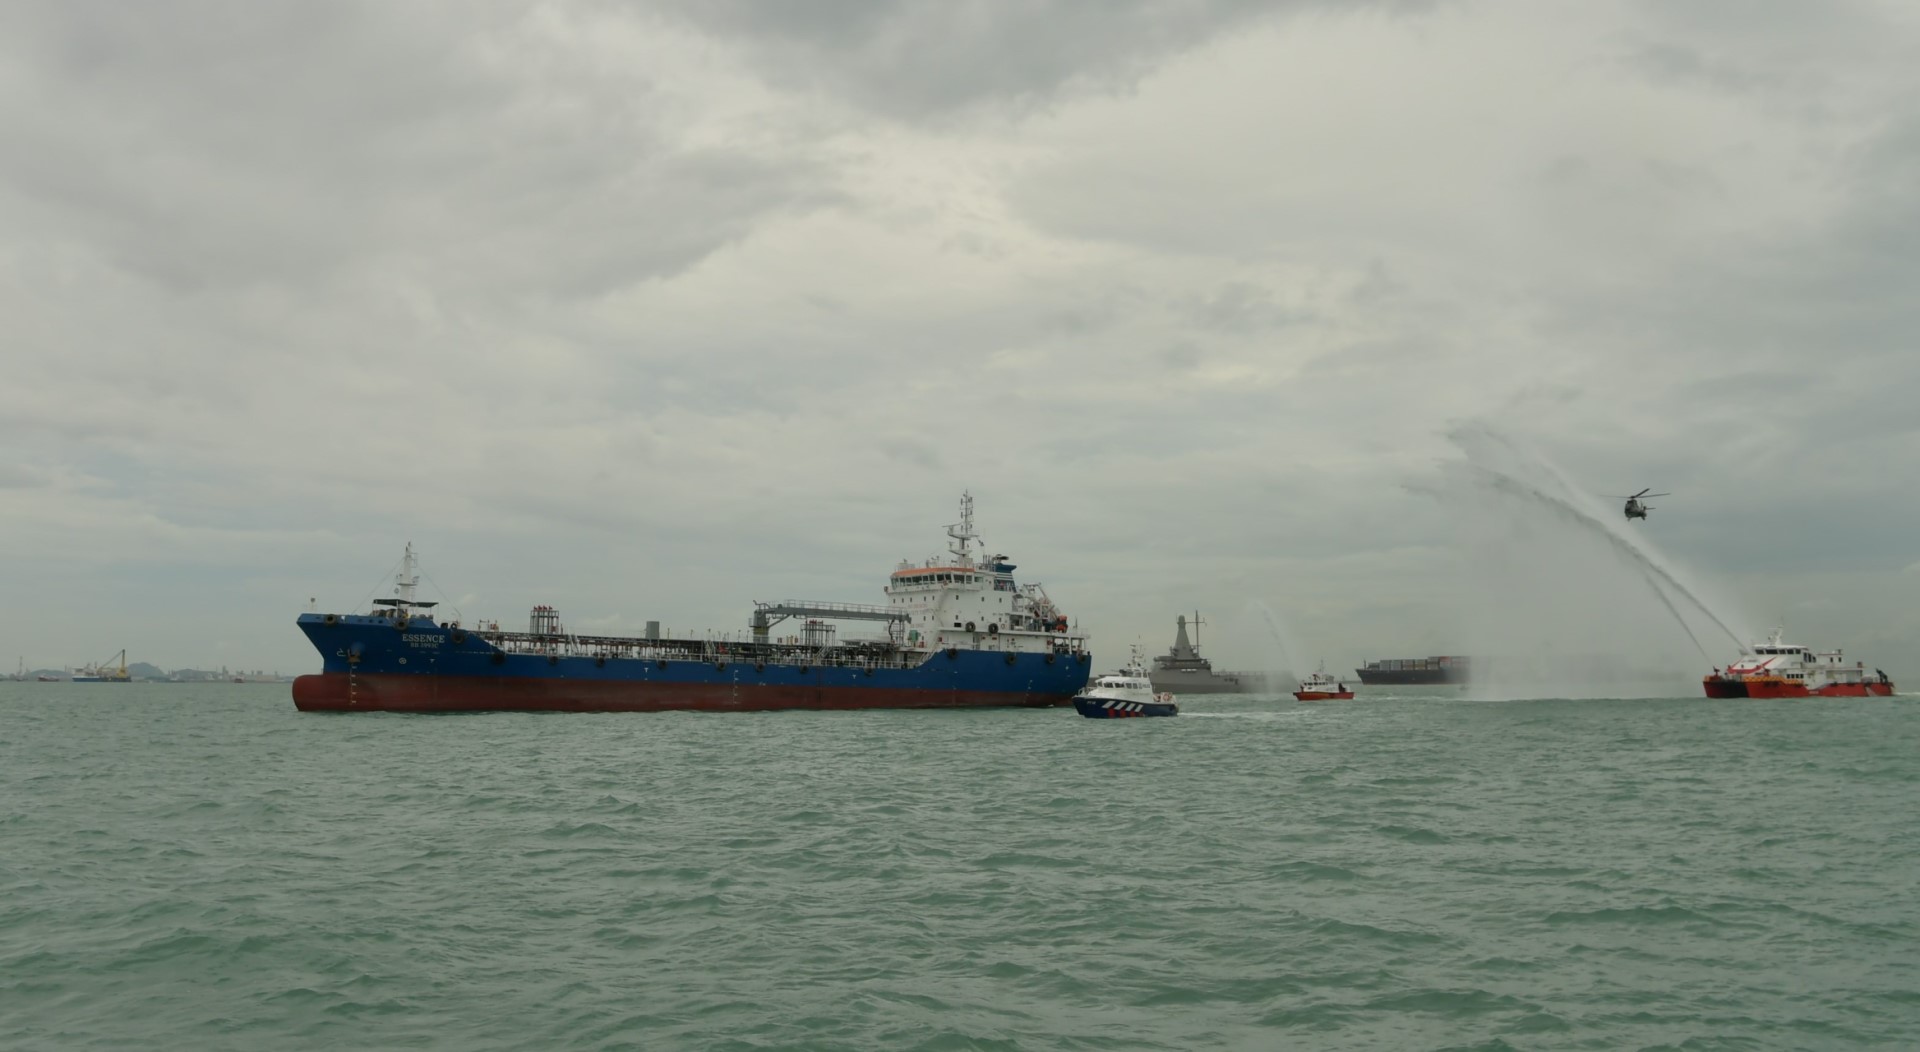 National maritime agencies coordinated a Whole-of-Government response to a 'hijacked' vessel.